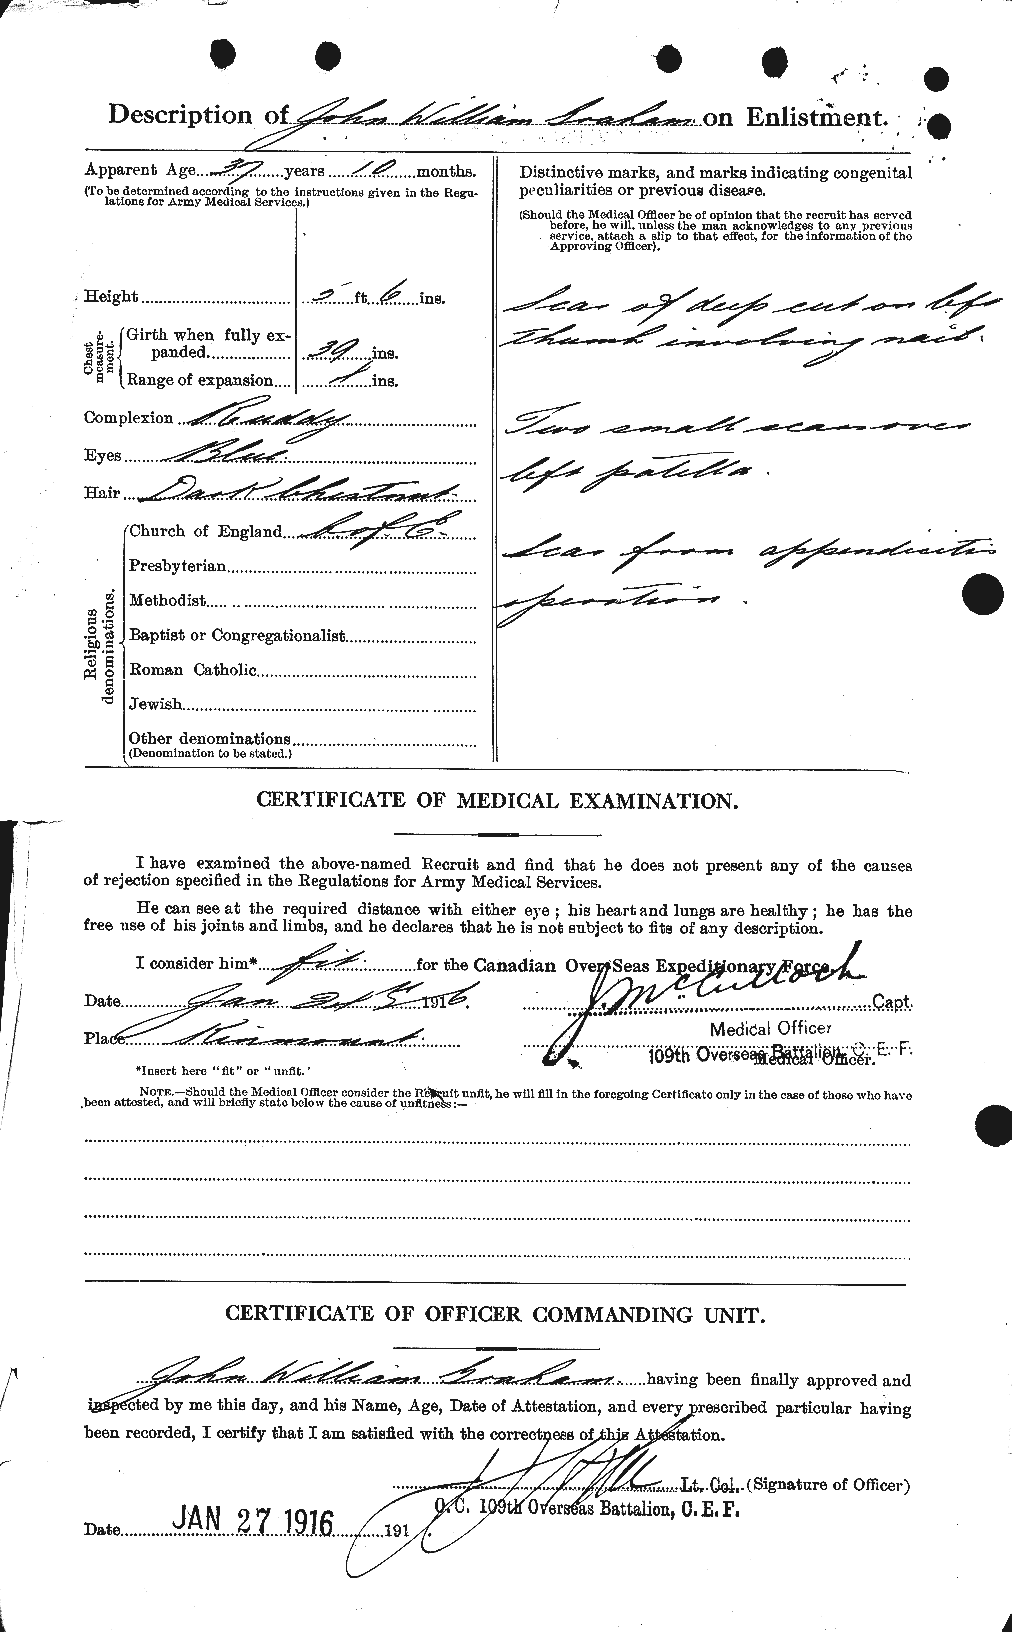 Personnel Records of the First World War - CEF 359217b